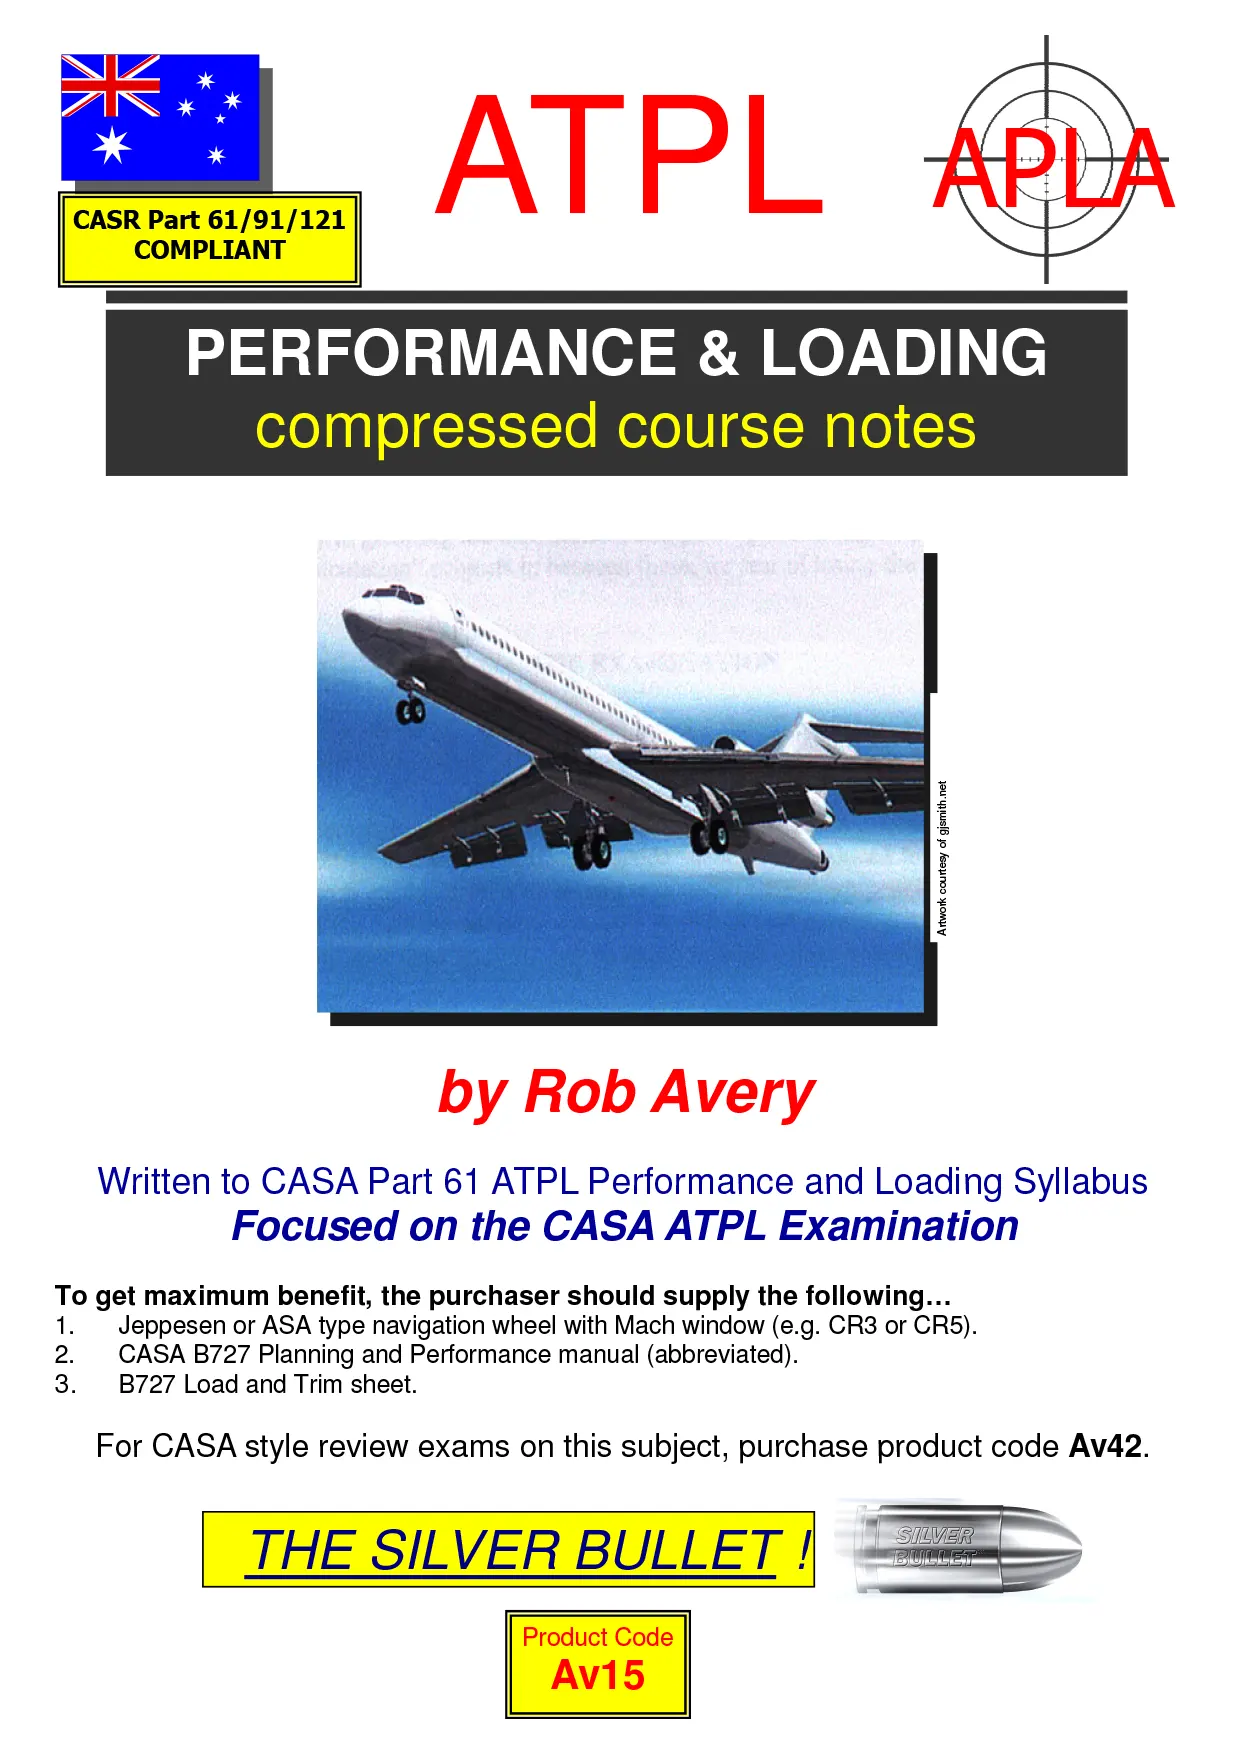 ATPL Performance & Loading Reference Textbook9